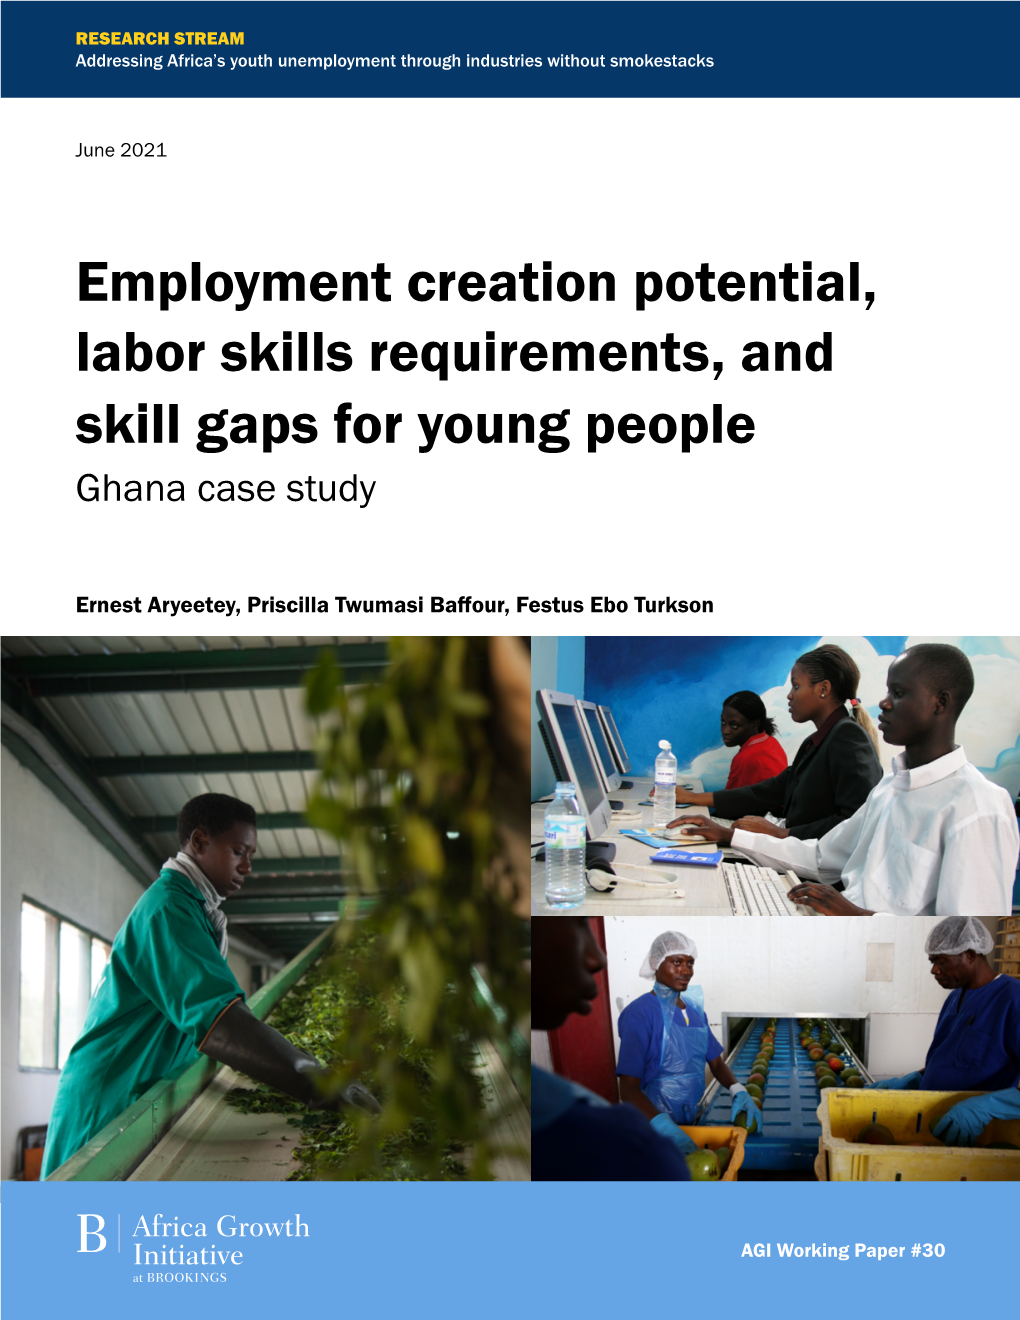 Employment Creation Potential, Labor Skills Requirements, and Skill Gaps for Young People Ghana Case Study